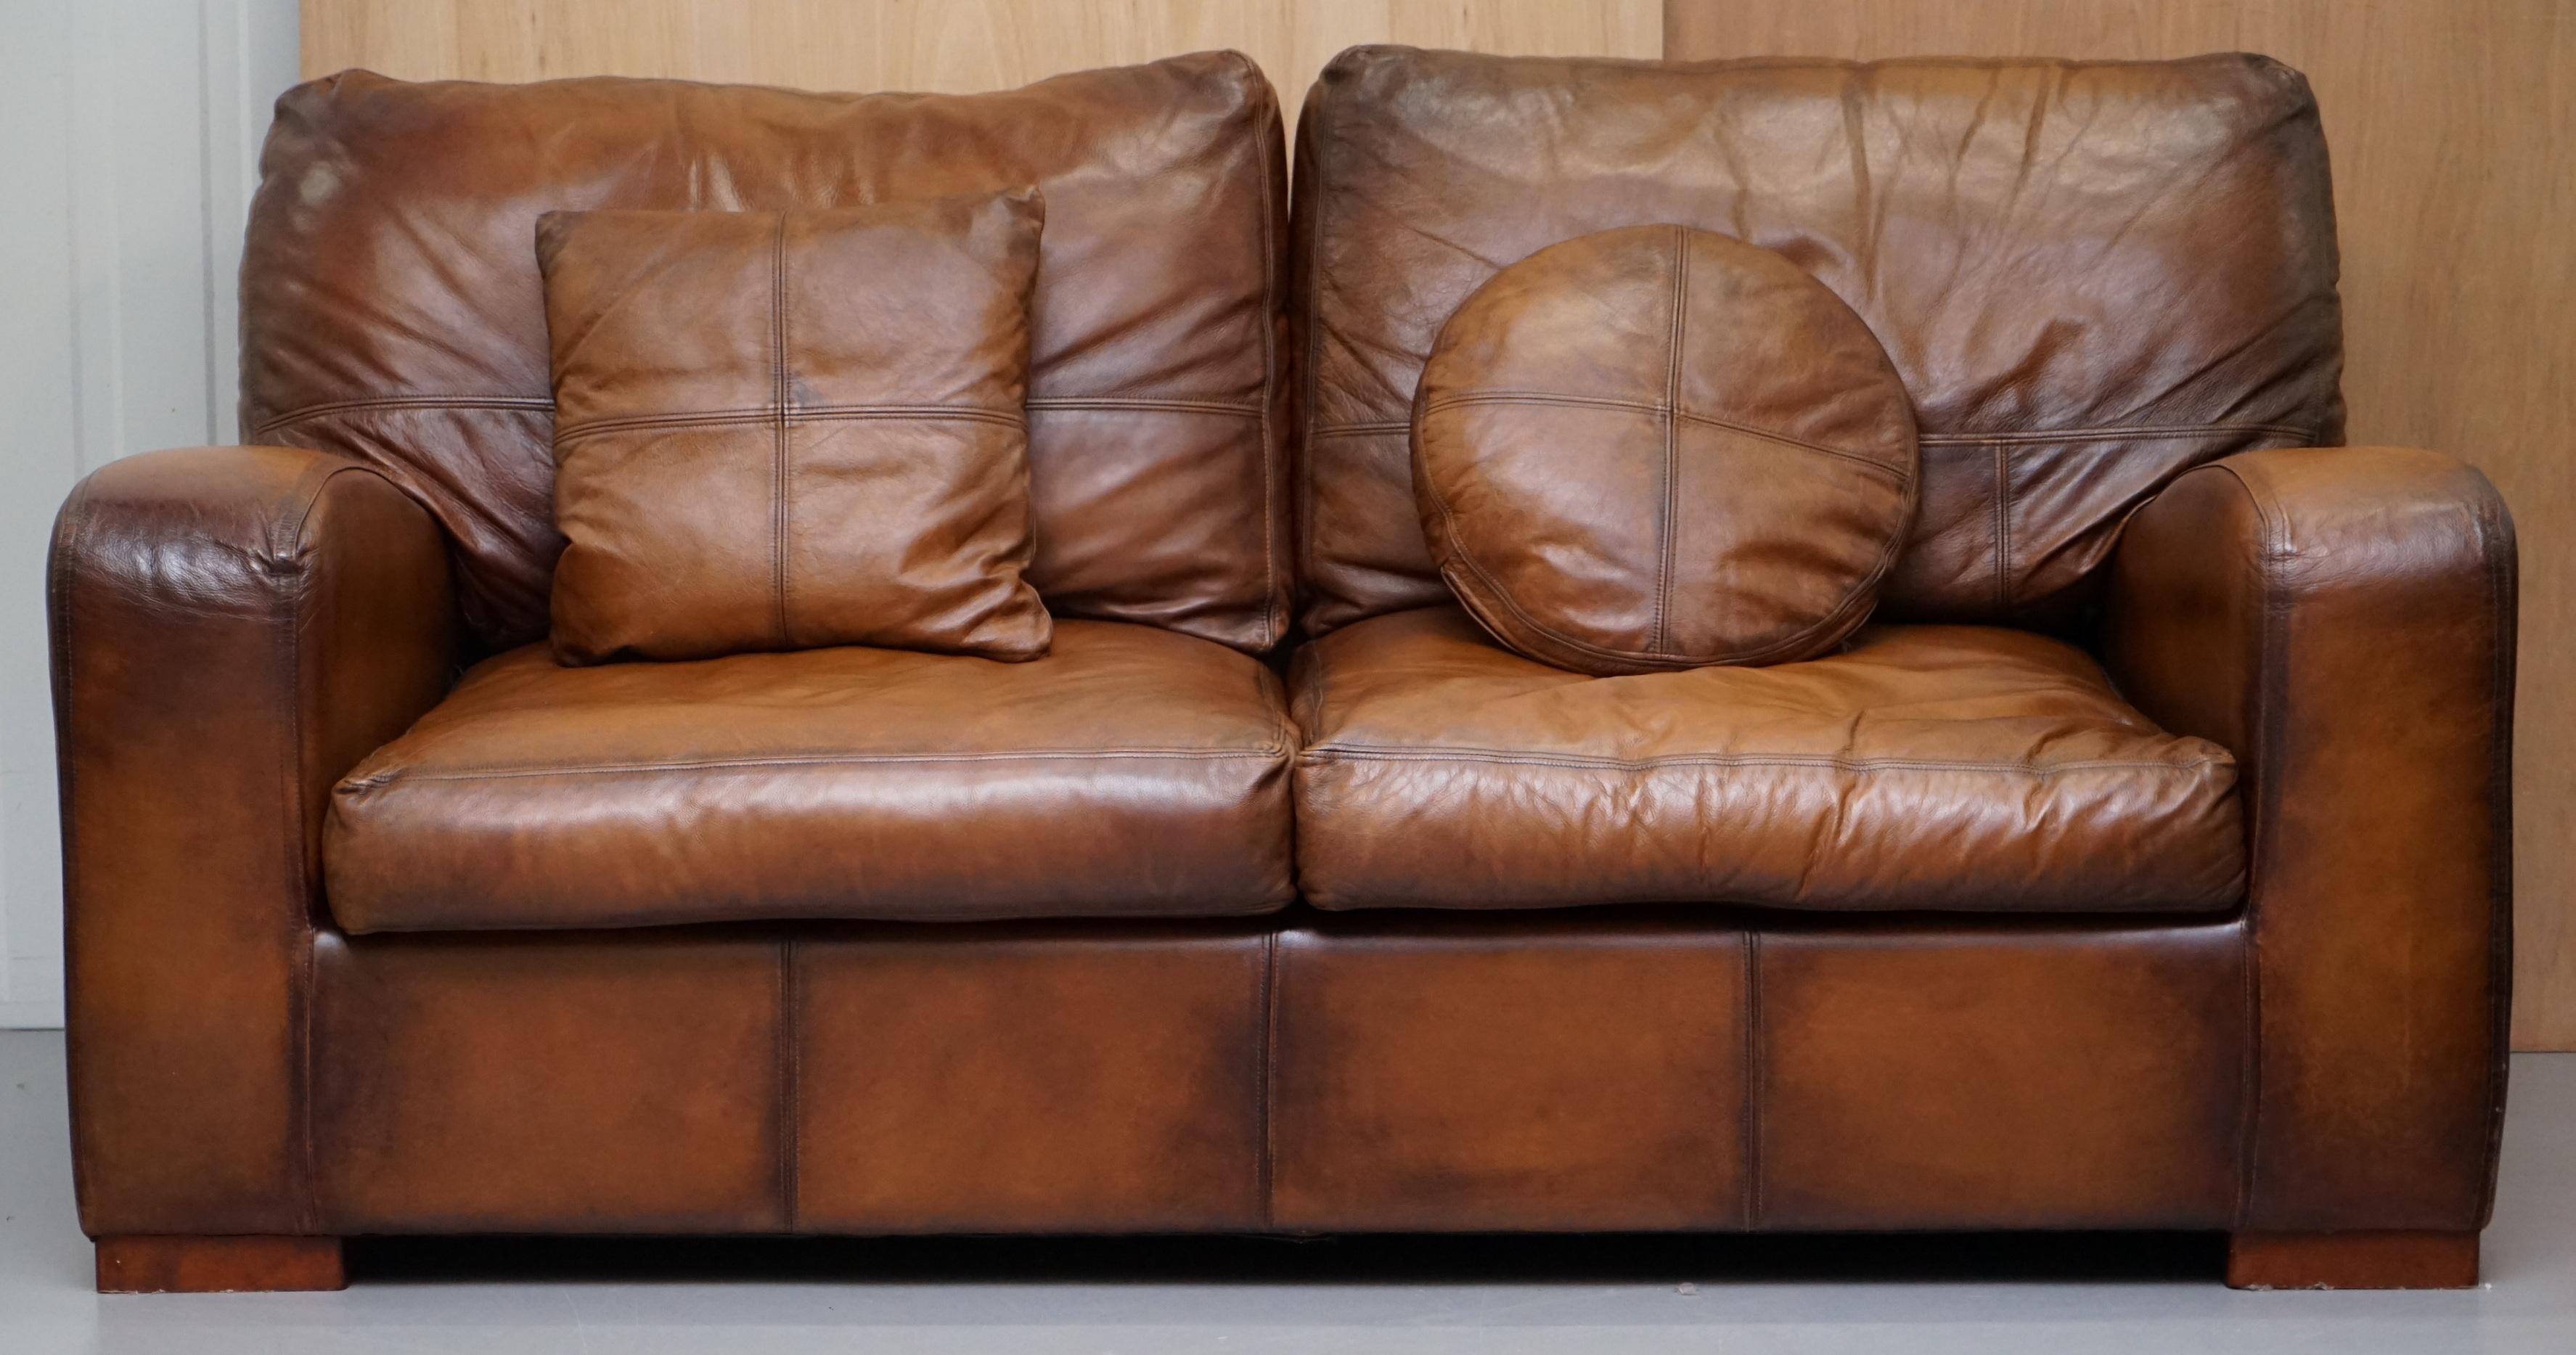 We are delighted to offer for sale hand dyed aged brown leather sofa

A good looking well made and decorative sofa, the lines to the sides especially the arms are very nice

We have cleaned waxed and polished it, its in pretty much retail new